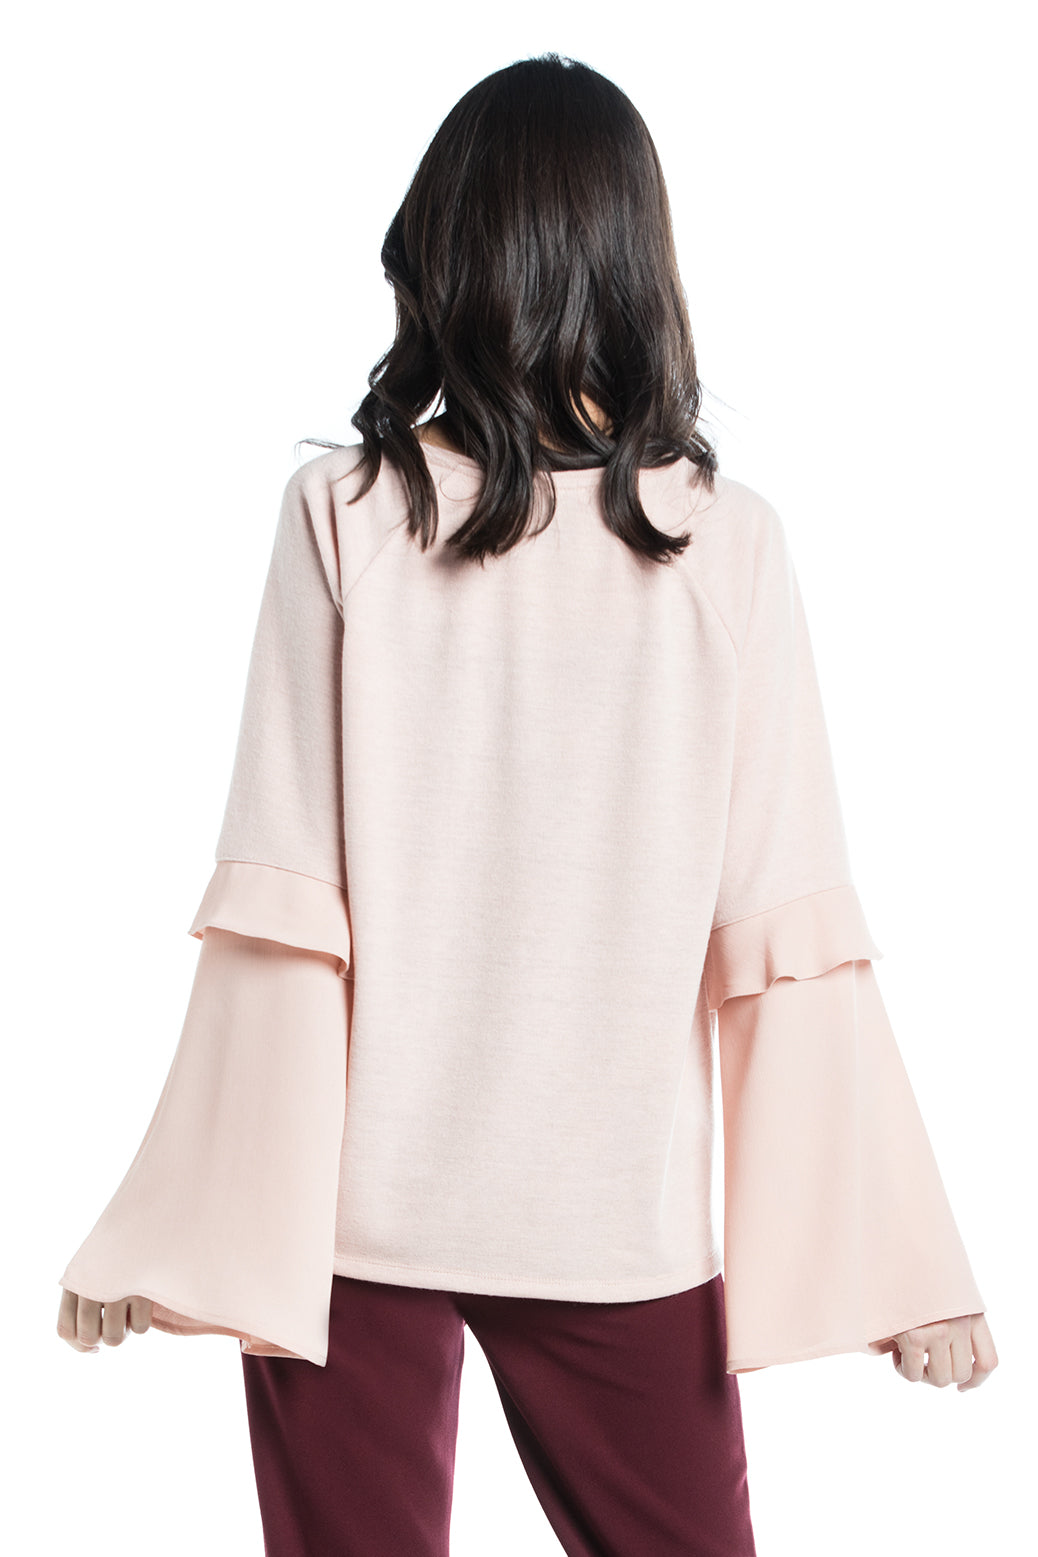 Cotton Brothers Rose Blush Bell Sleeve Jumper freeshipping - Ruby 67 Boutique